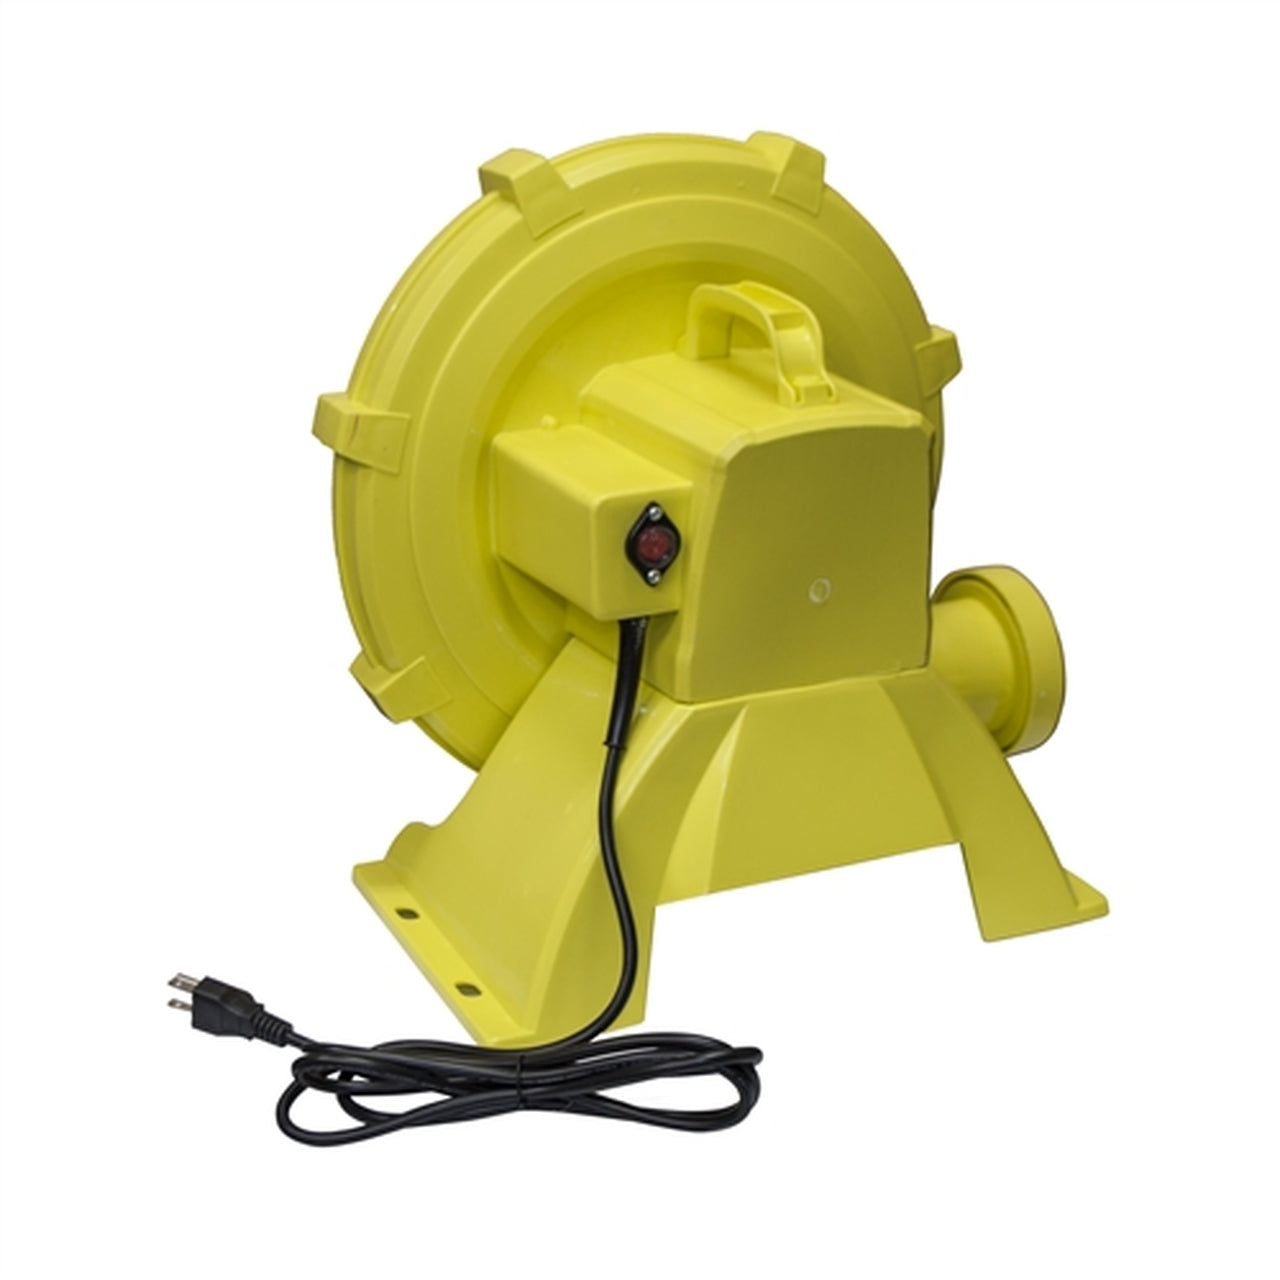 Aleko Tools Air Blower Pump Fan for Inflatable Bounce House